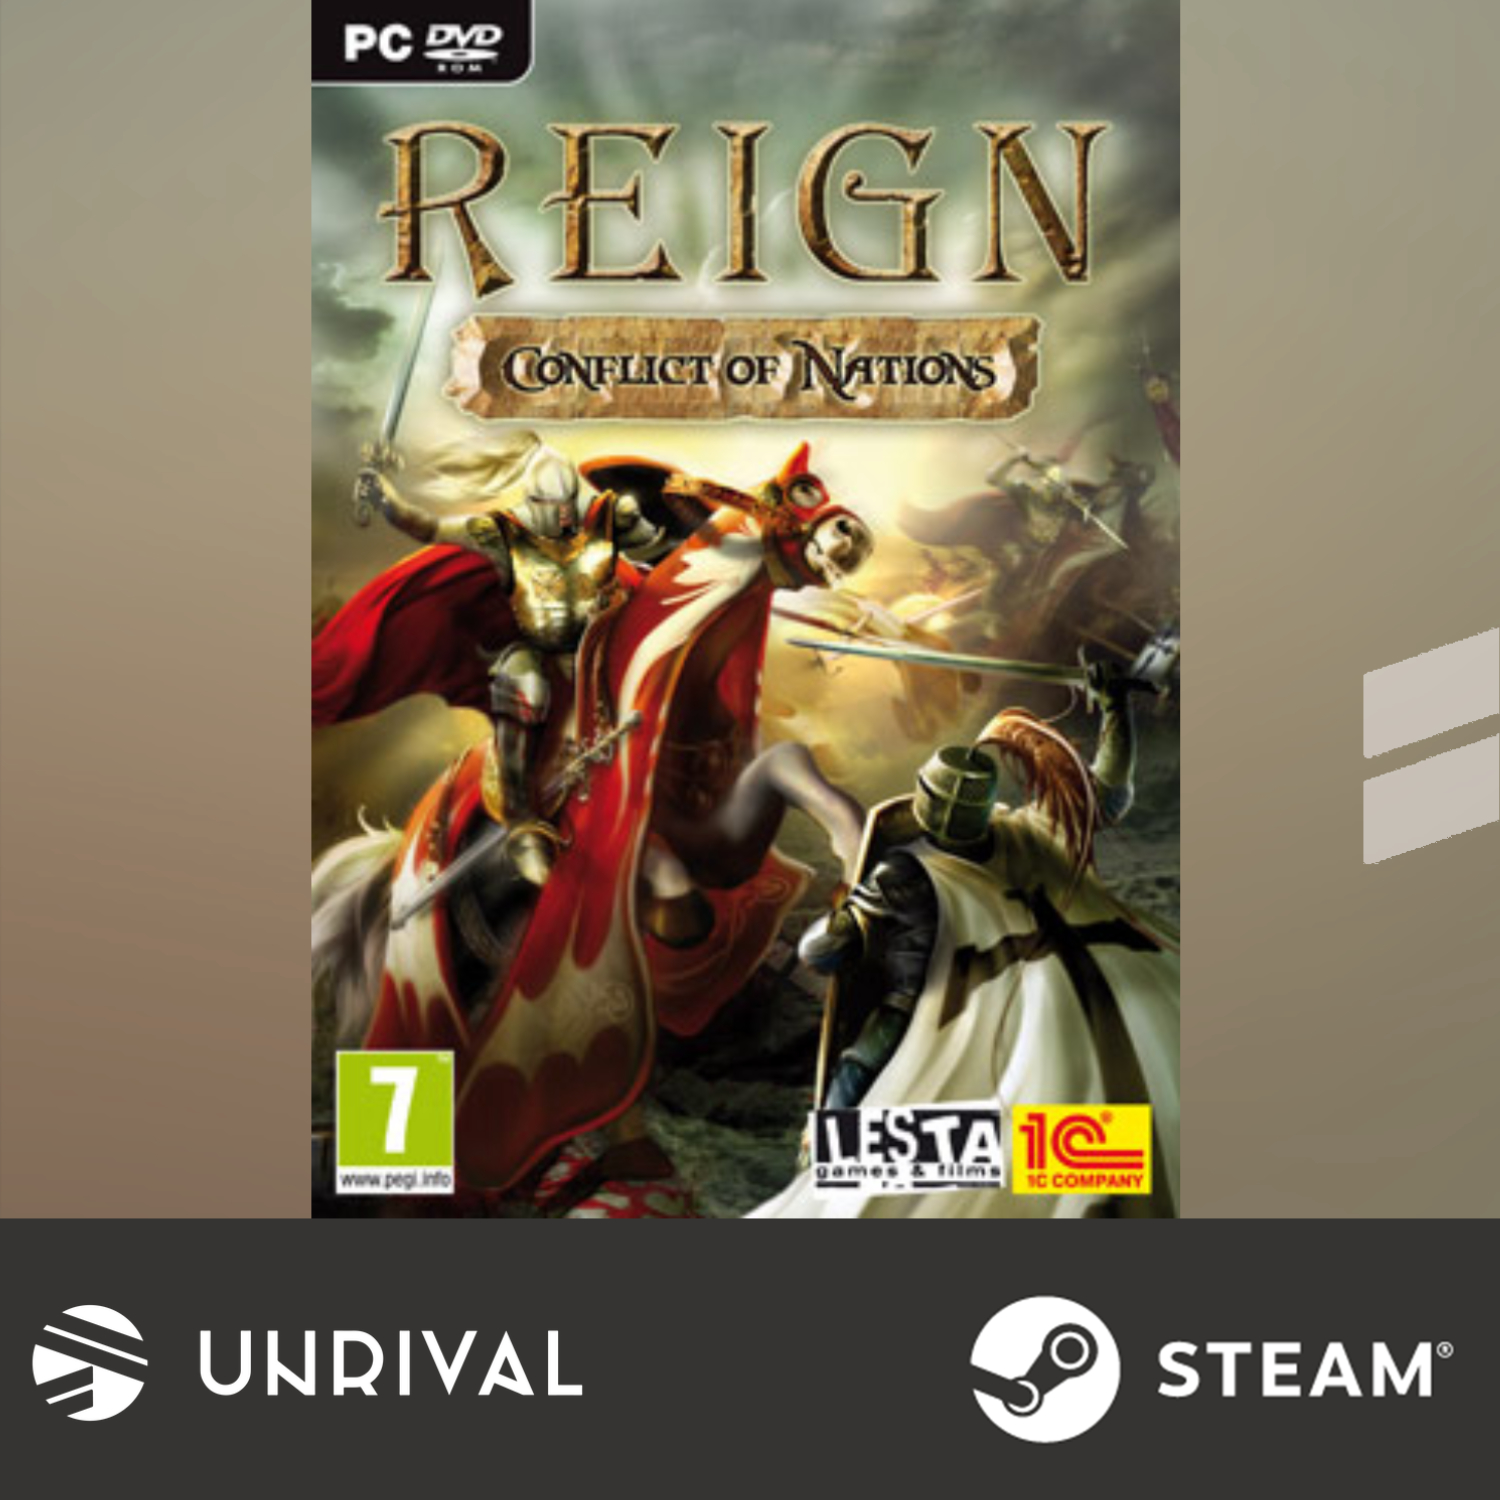 Reign: Conflict of Nations PC Digital Download Game (Single Player) - Unrival